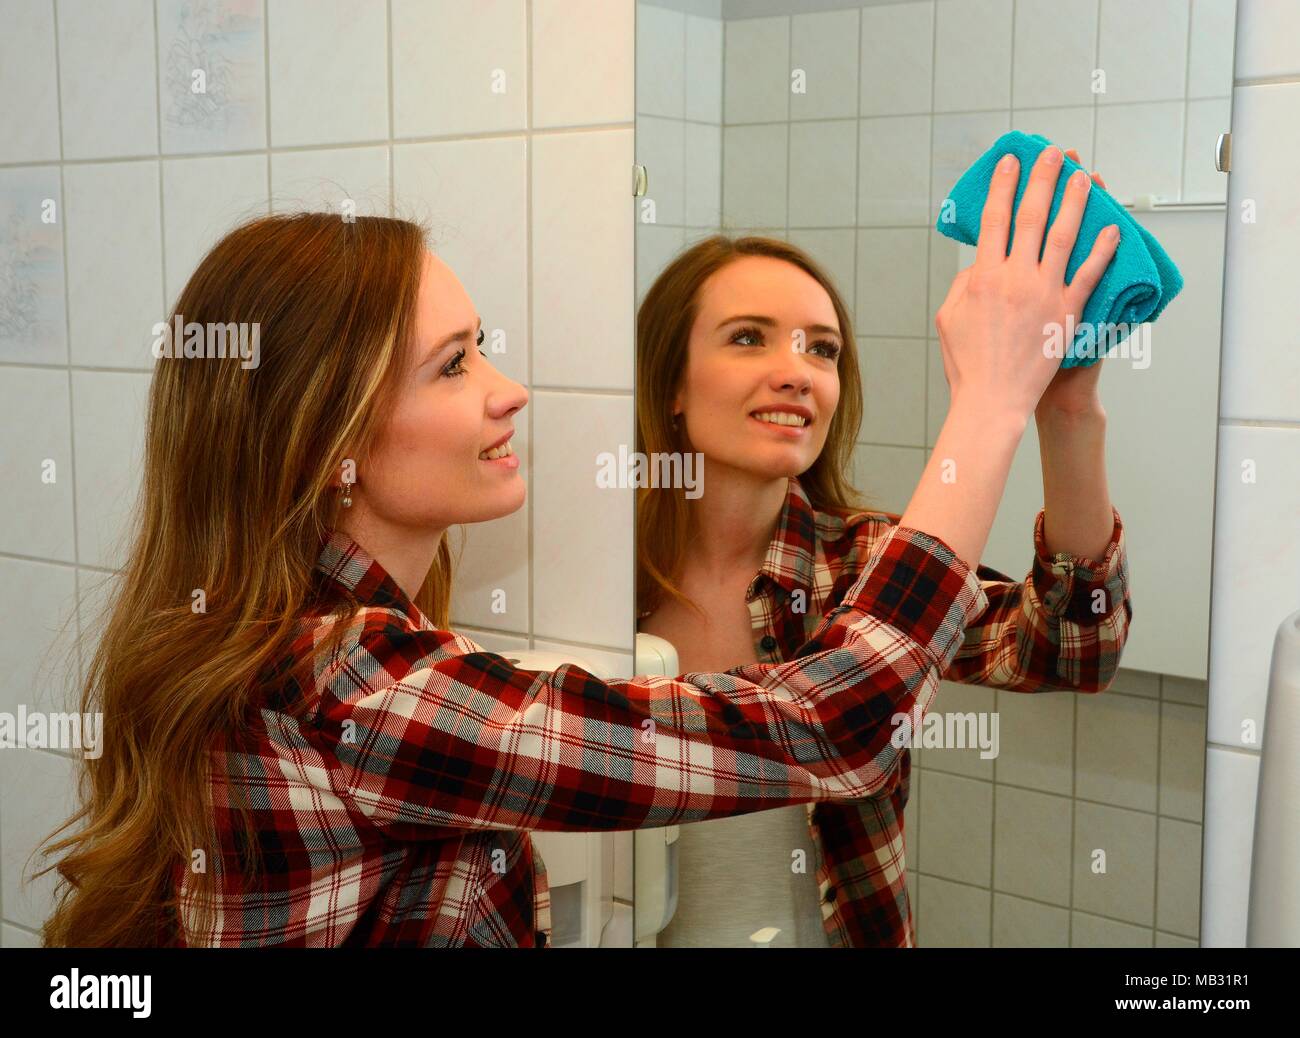 House work, young woman cleaning mirrir in a bathroom, Sweden Stock Photo